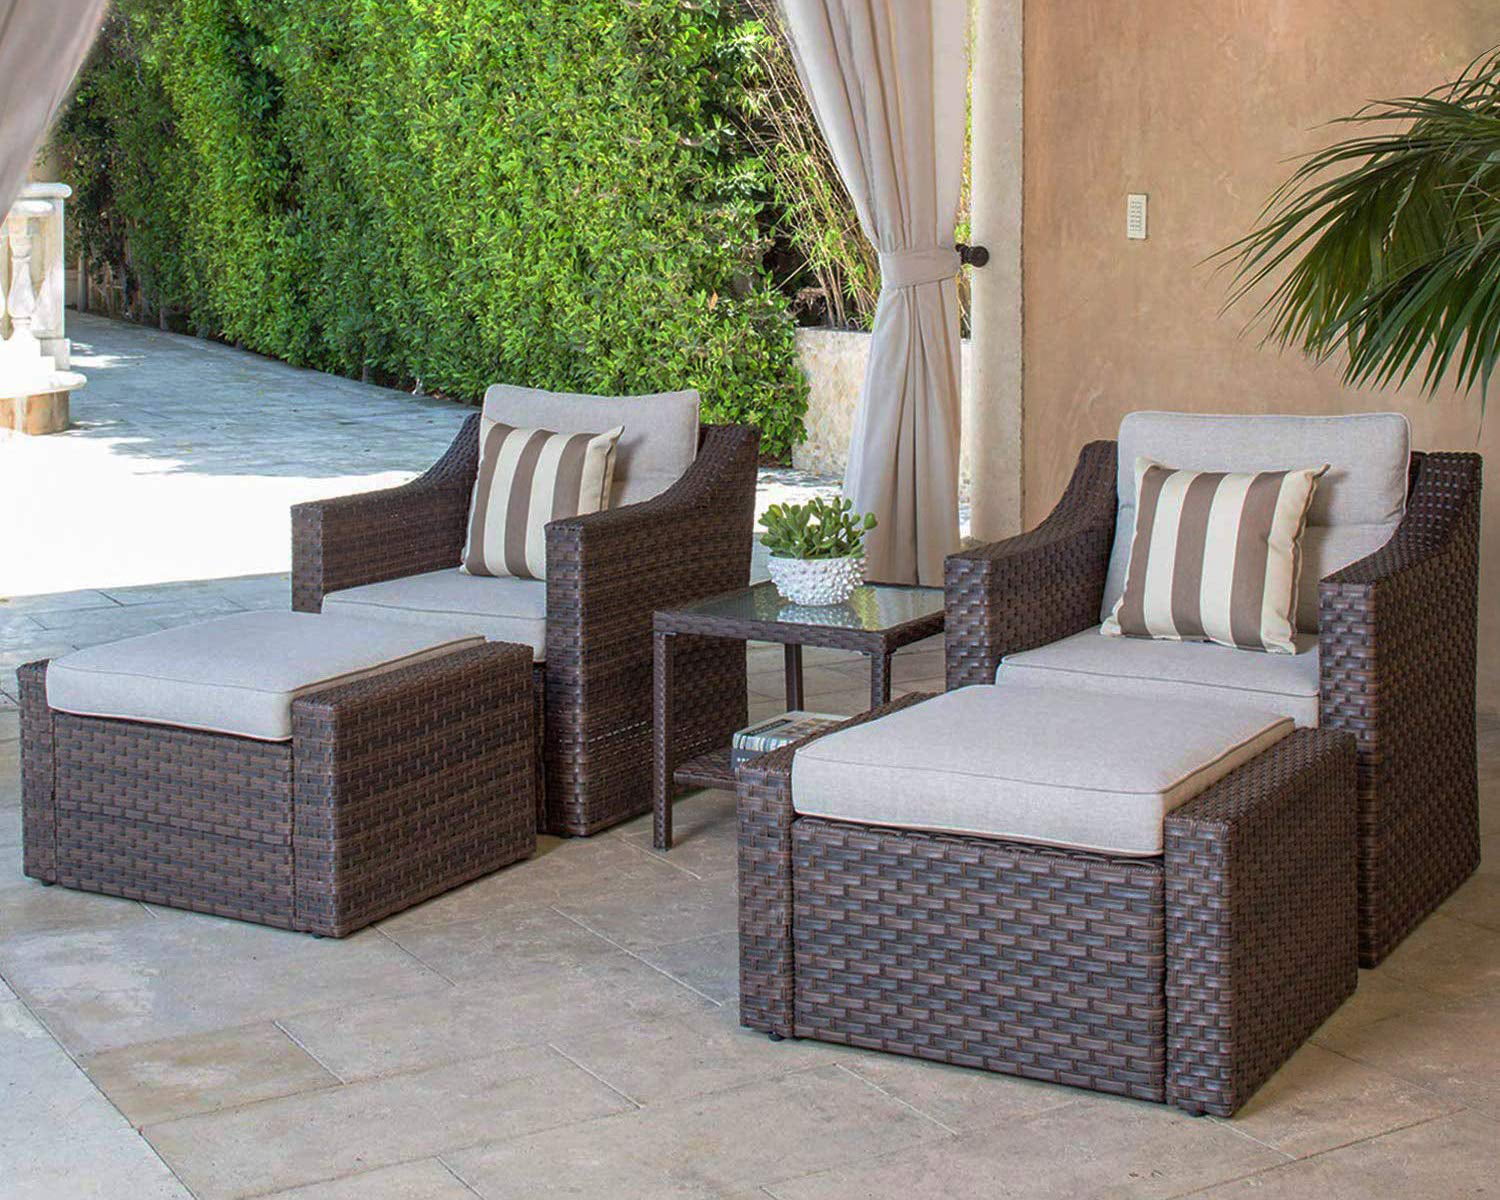 SUNCROWN 5PC Outdoor Wicker Sofa Seating Set with Table